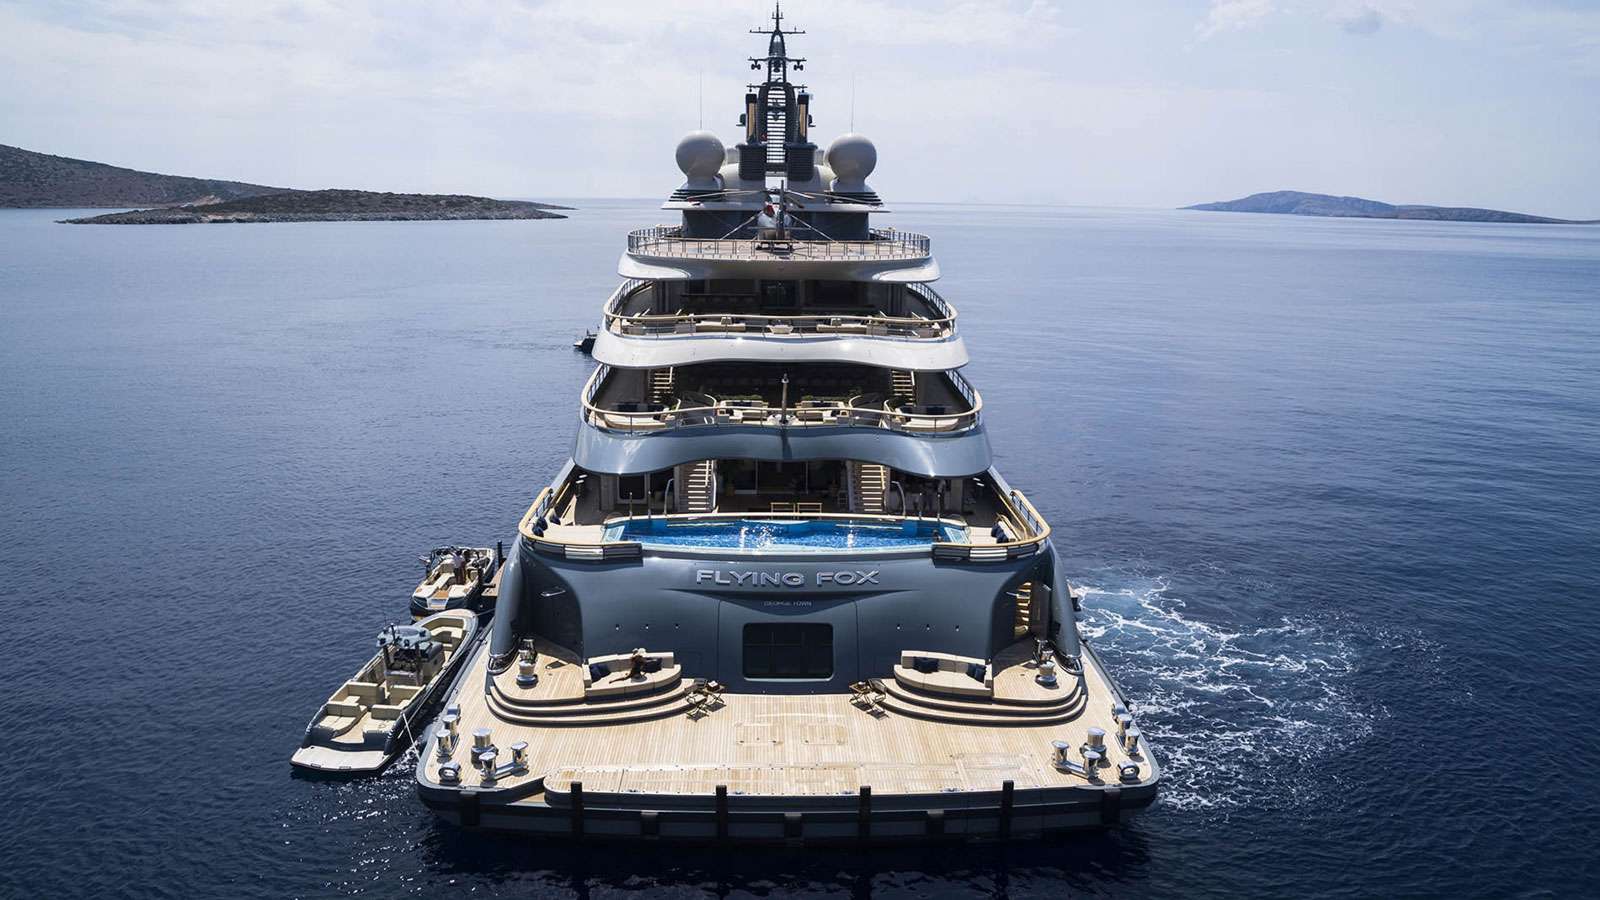 Flying Fox Charter: What It Costs To Rent The World’s Largest Yacht